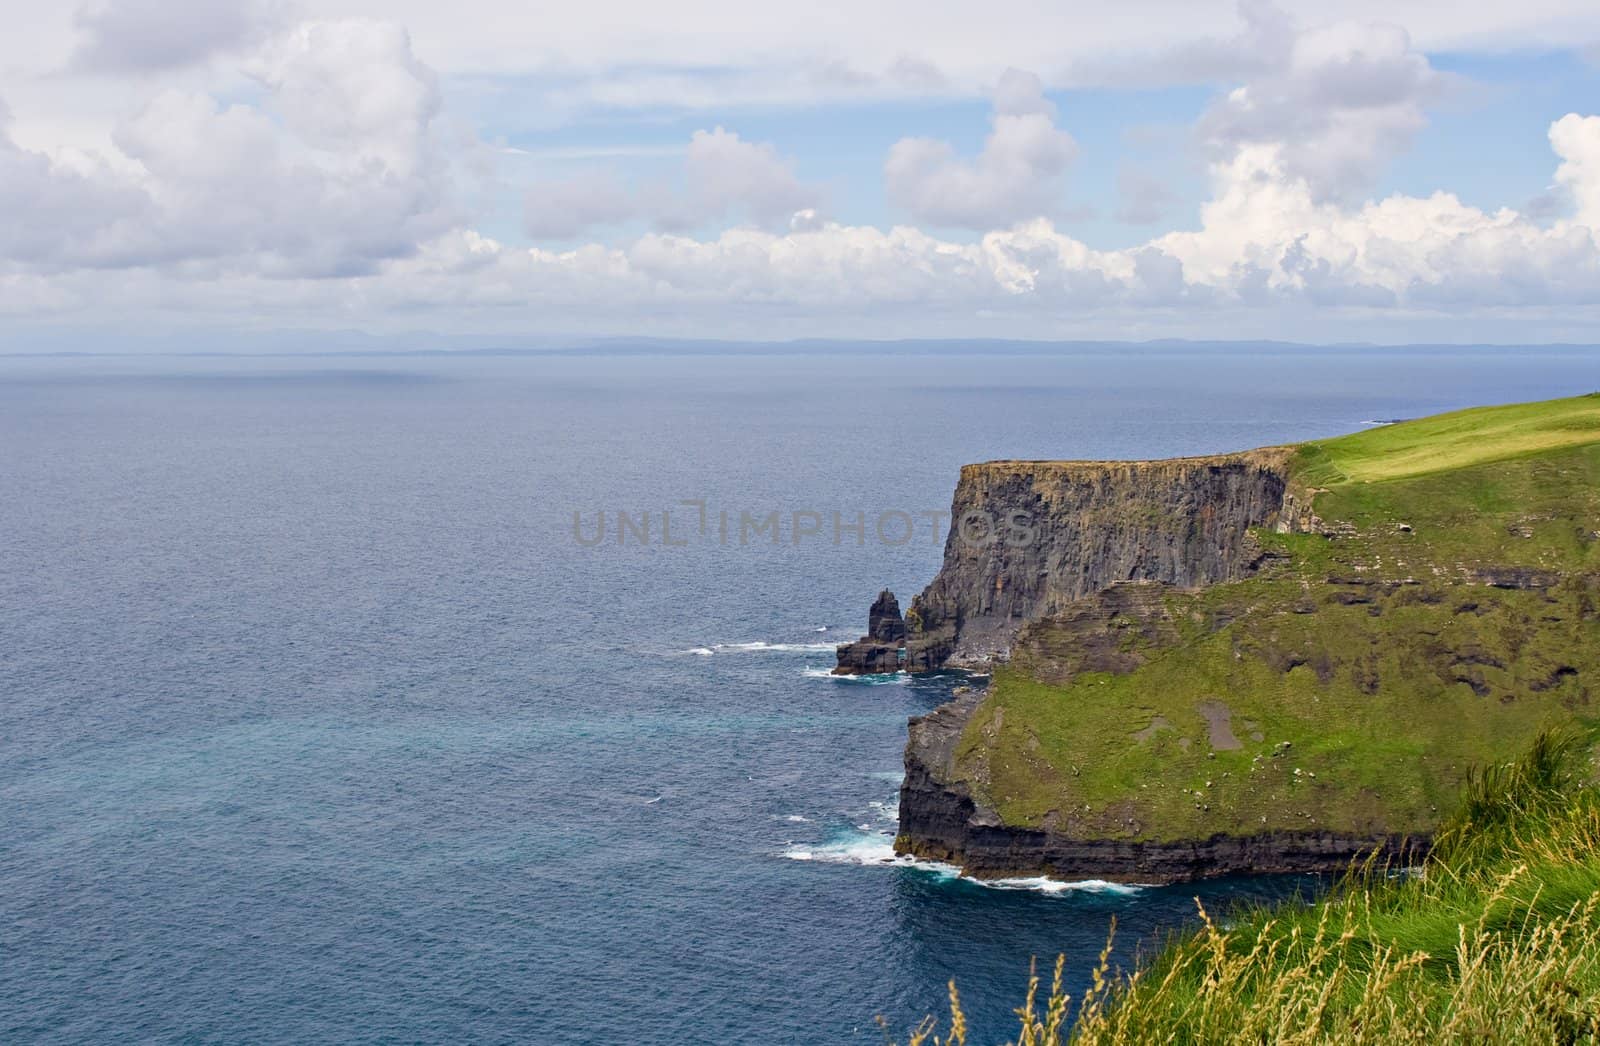 The Cliffs of Moher in County Clare, Ireland. This is on the Atlantic Ocean shoreline.